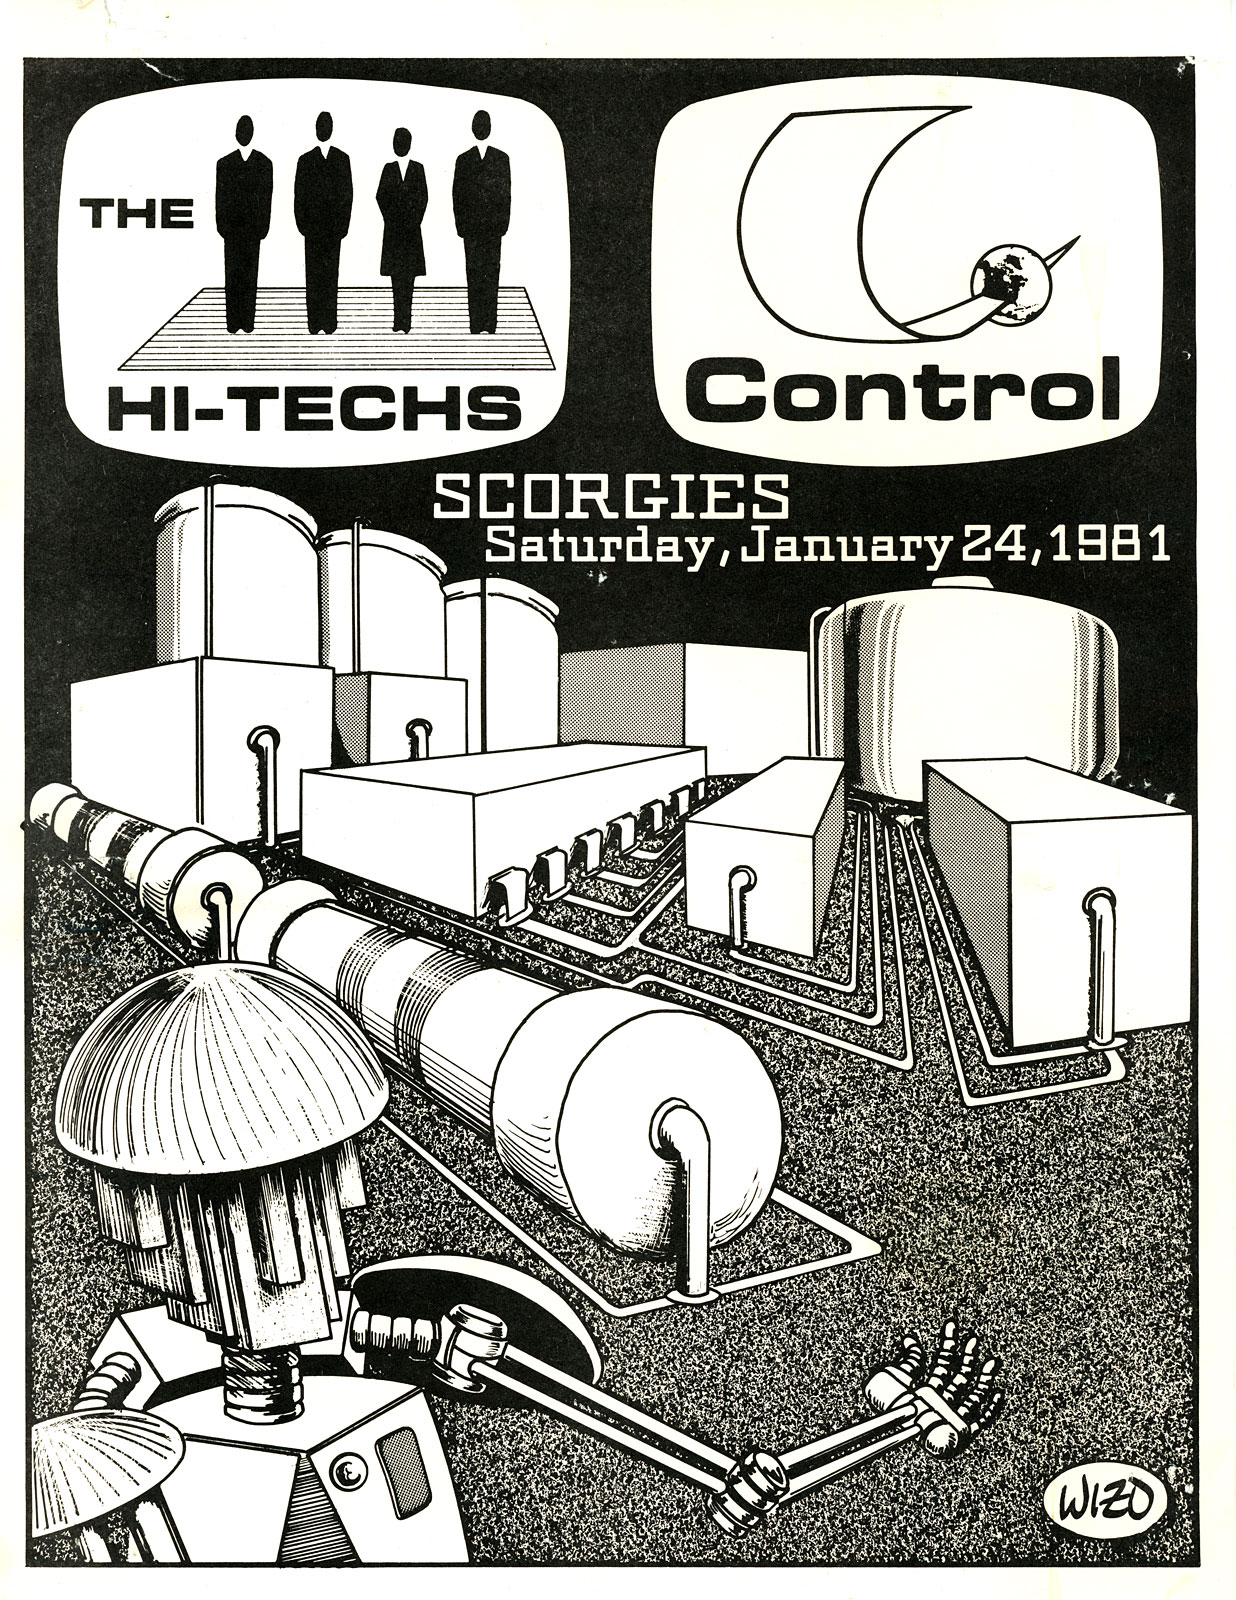 Poster for Hi-Techs_with Control at Scorgie's in Rochester, New York 01.24.1981. Someone in Control designed this poster.